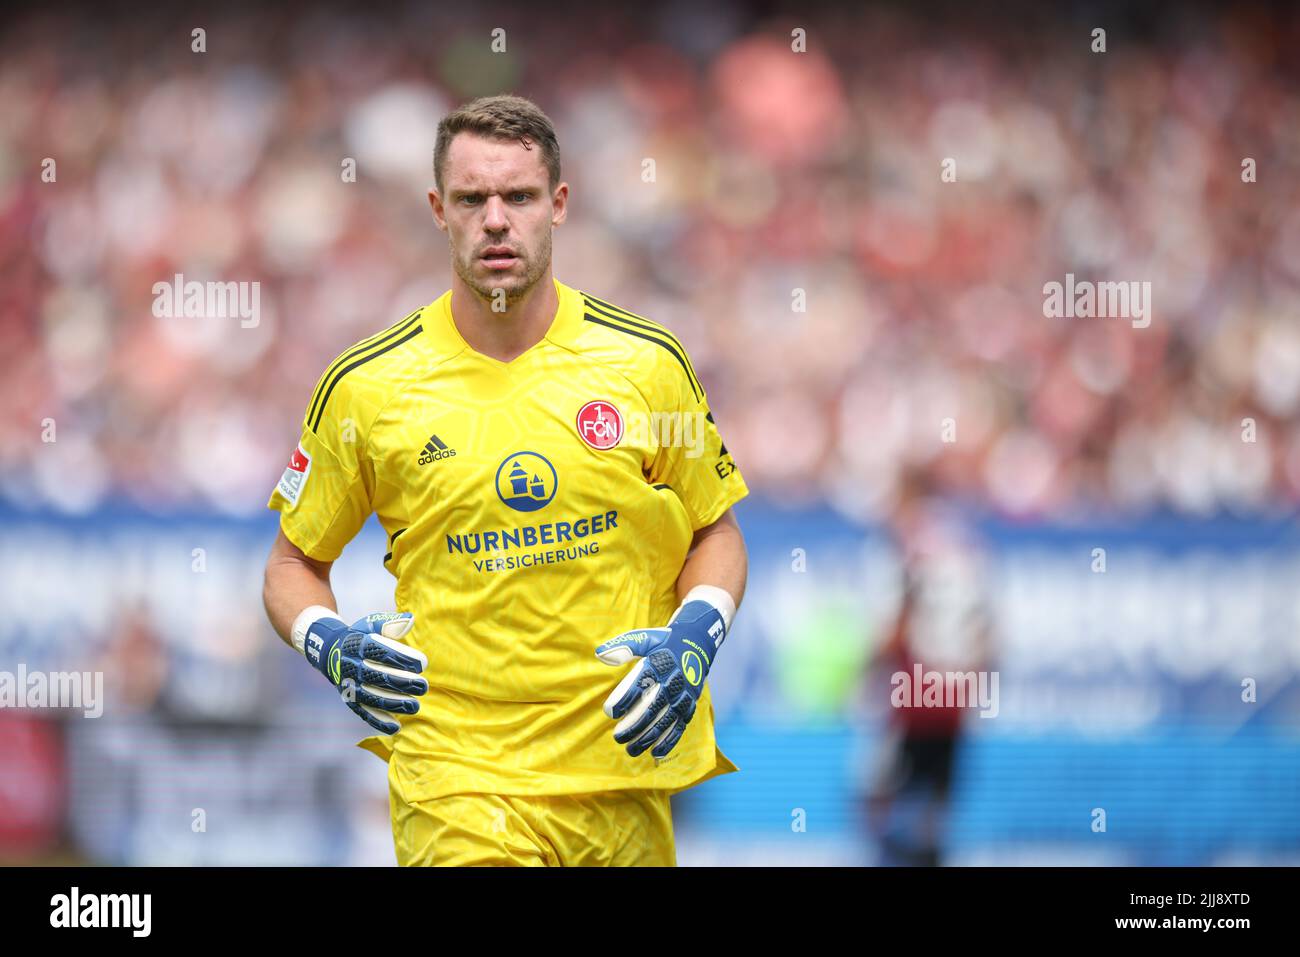 23 July 2022, Bavaria, Nuremberg: Soccer: 2nd Bundesliga, 1. FC Nuremberg - SpVgg Greuther Fürth, 2nd matchday at Max Morlock Stadium. Nuremberg goalkeeper Christian Mathenia. Photo: Daniel Karmann/dpa - IMPORTANT NOTE: In accordance with the requirements of the DFL Deutsche Fußball Liga and the DFB Deutscher Fußball-Bund, it is prohibited to use or have used photographs taken in the stadium and/or of the match in the form of sequence pictures and/or video-like photo series. Stock Photo